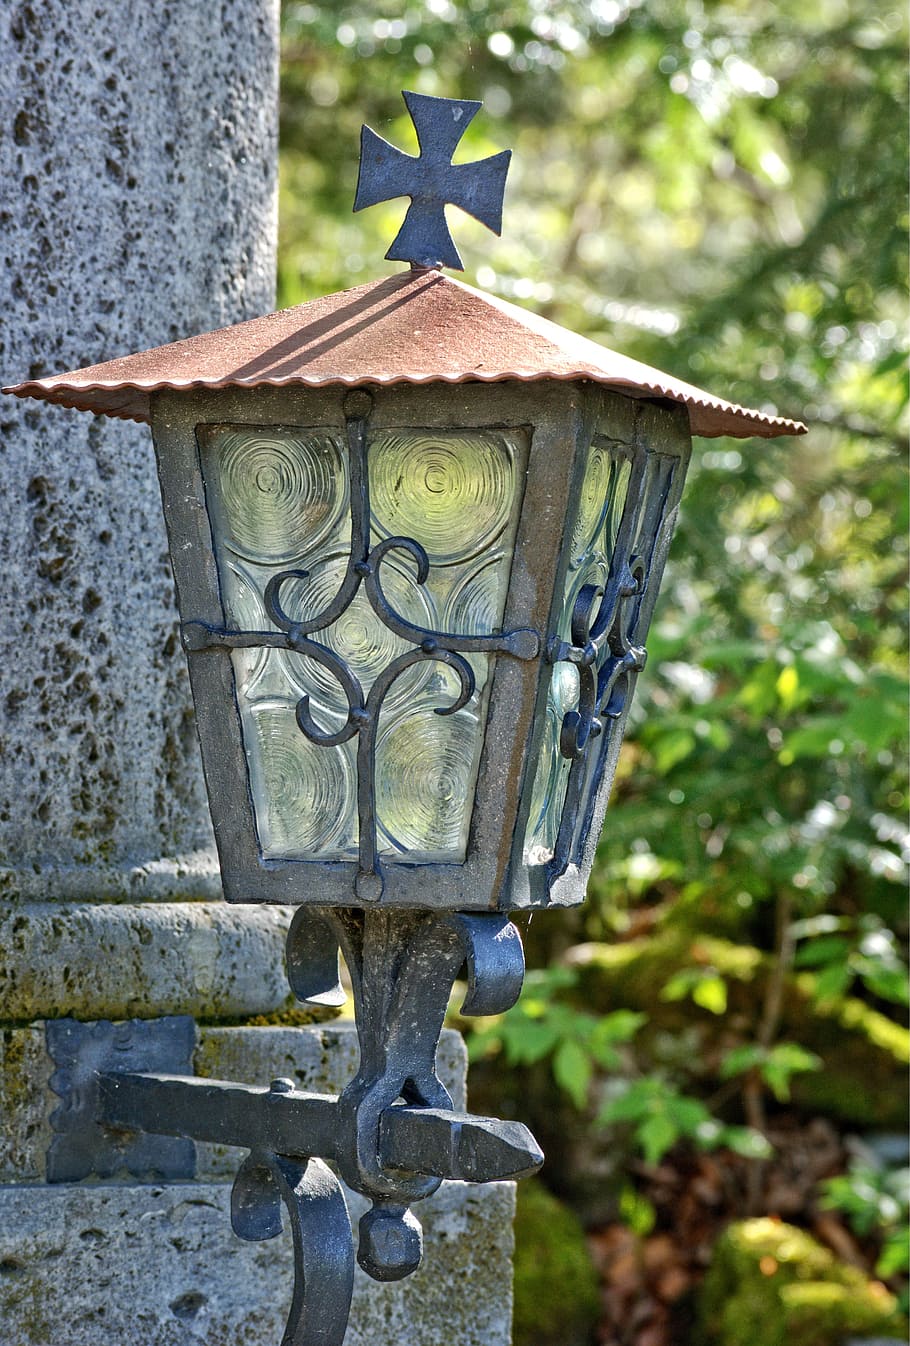 lamp, lighting, light, lantern, candlestick, outdoor, old, out of date, wrought iron, nostalgia